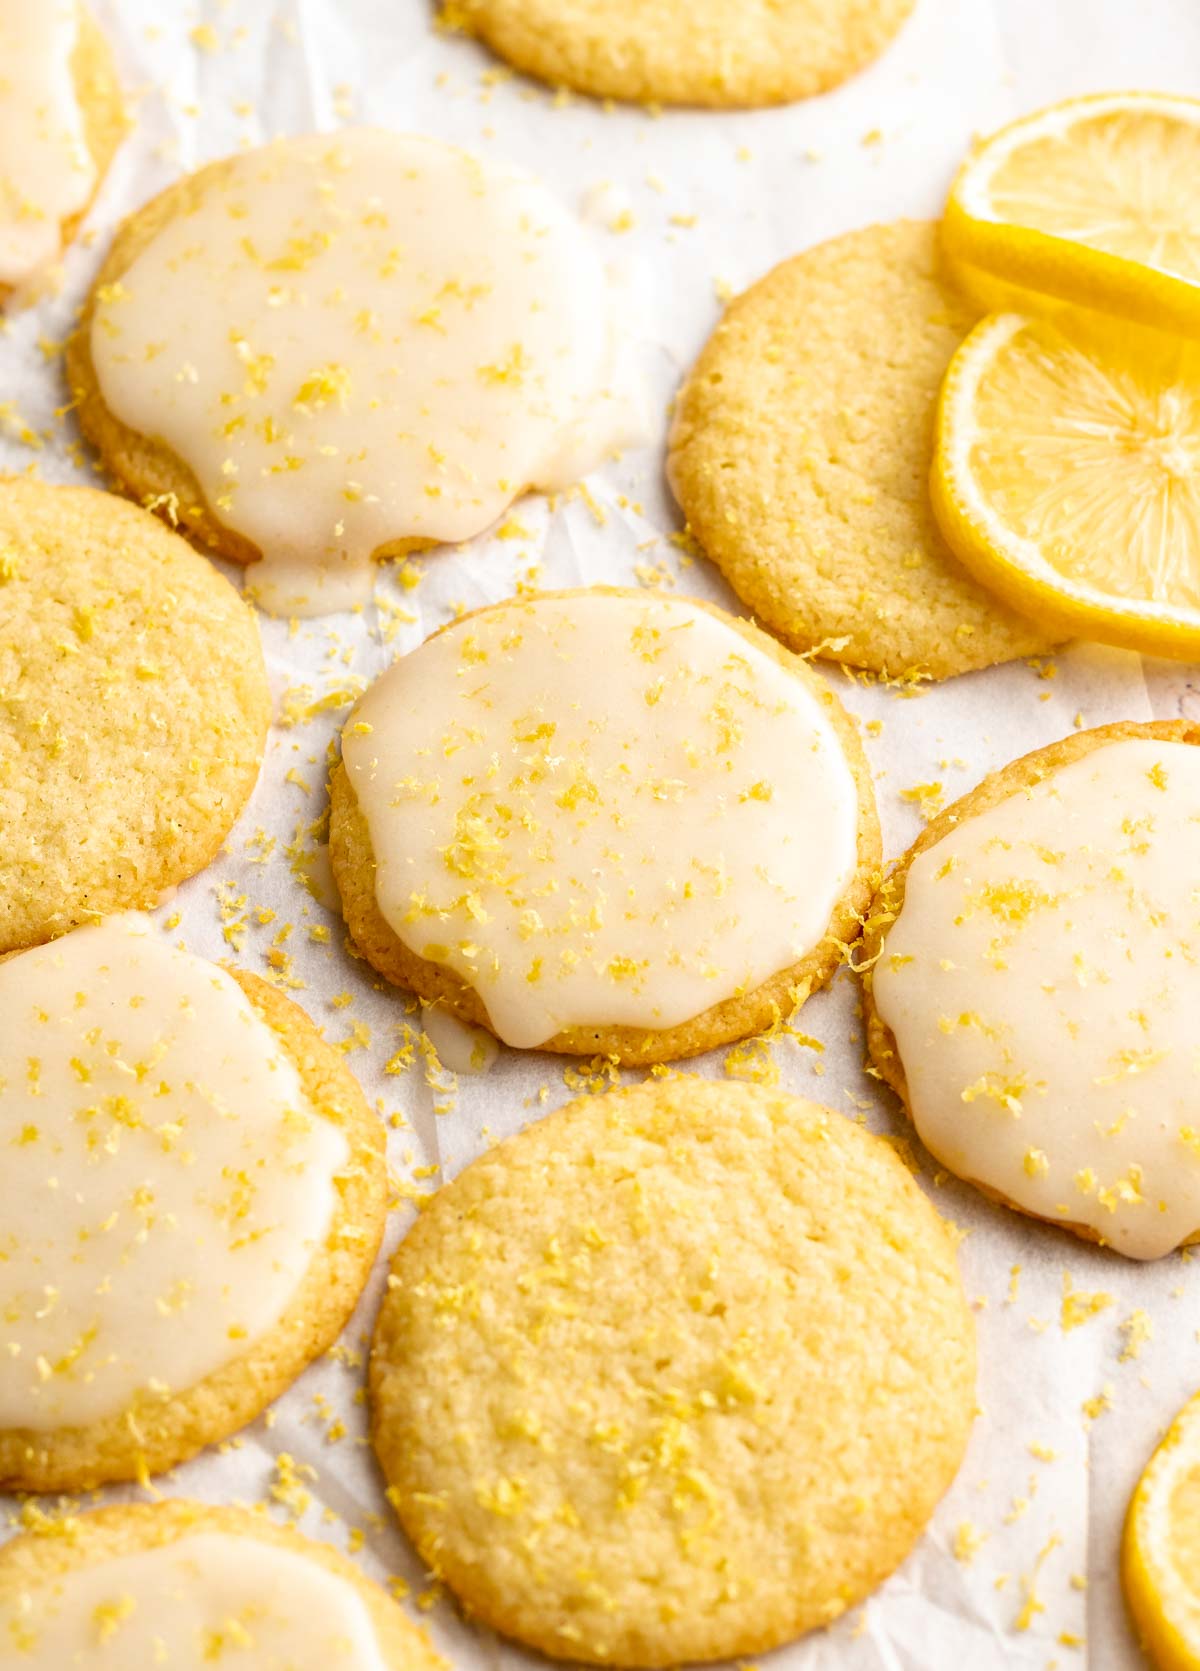 Cookies on a parchment paper with glaze and lemon zest on top.